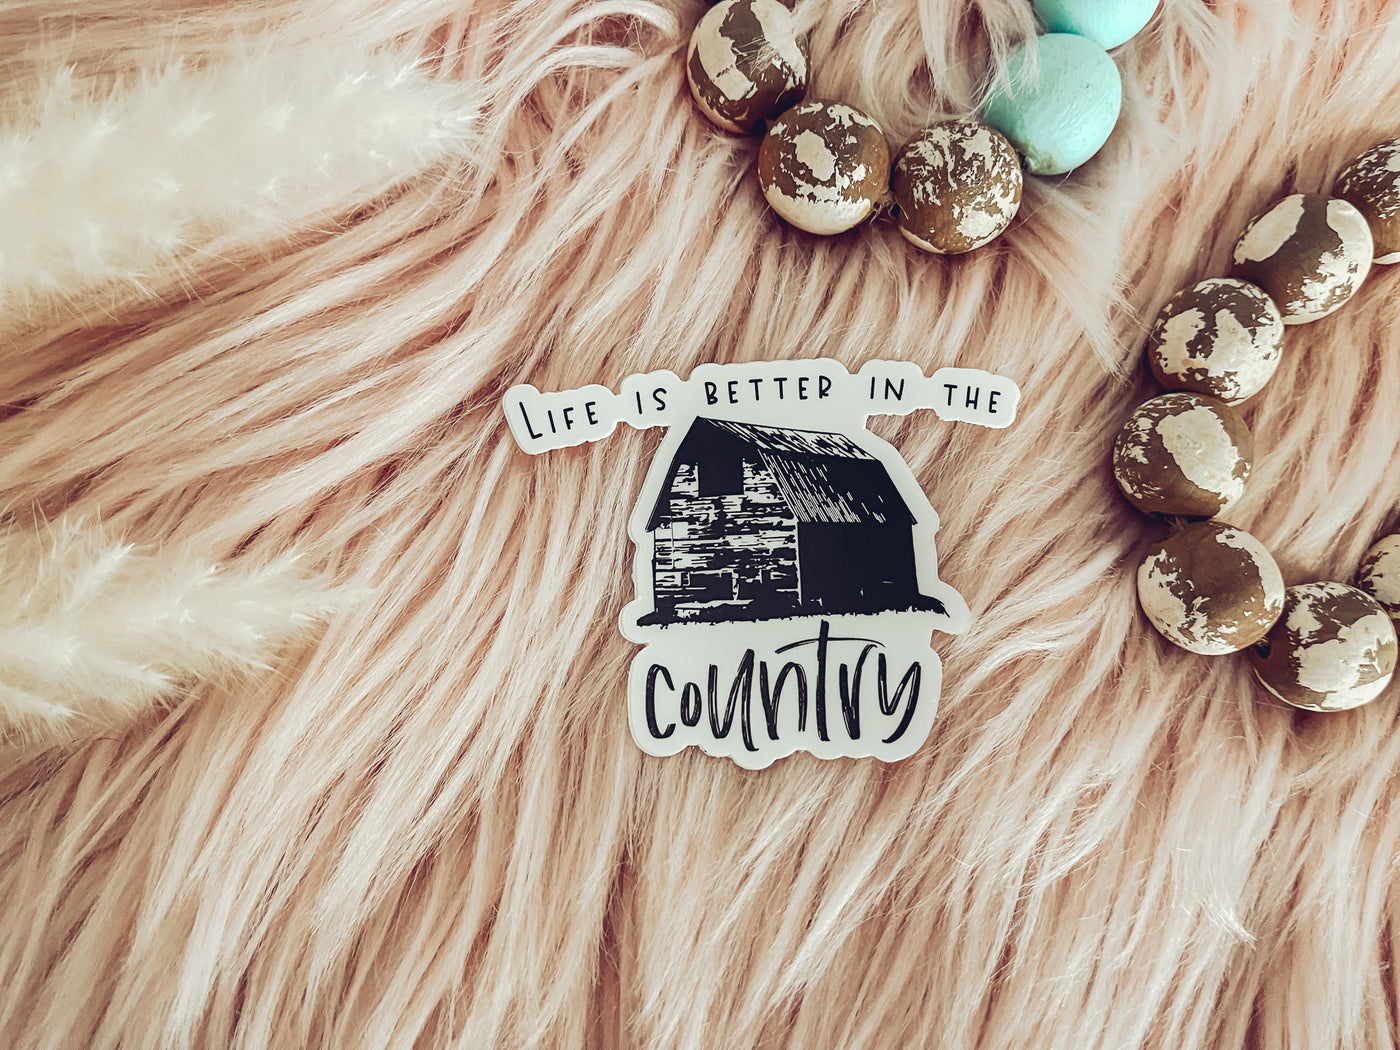 Life is better in the country - Sticker